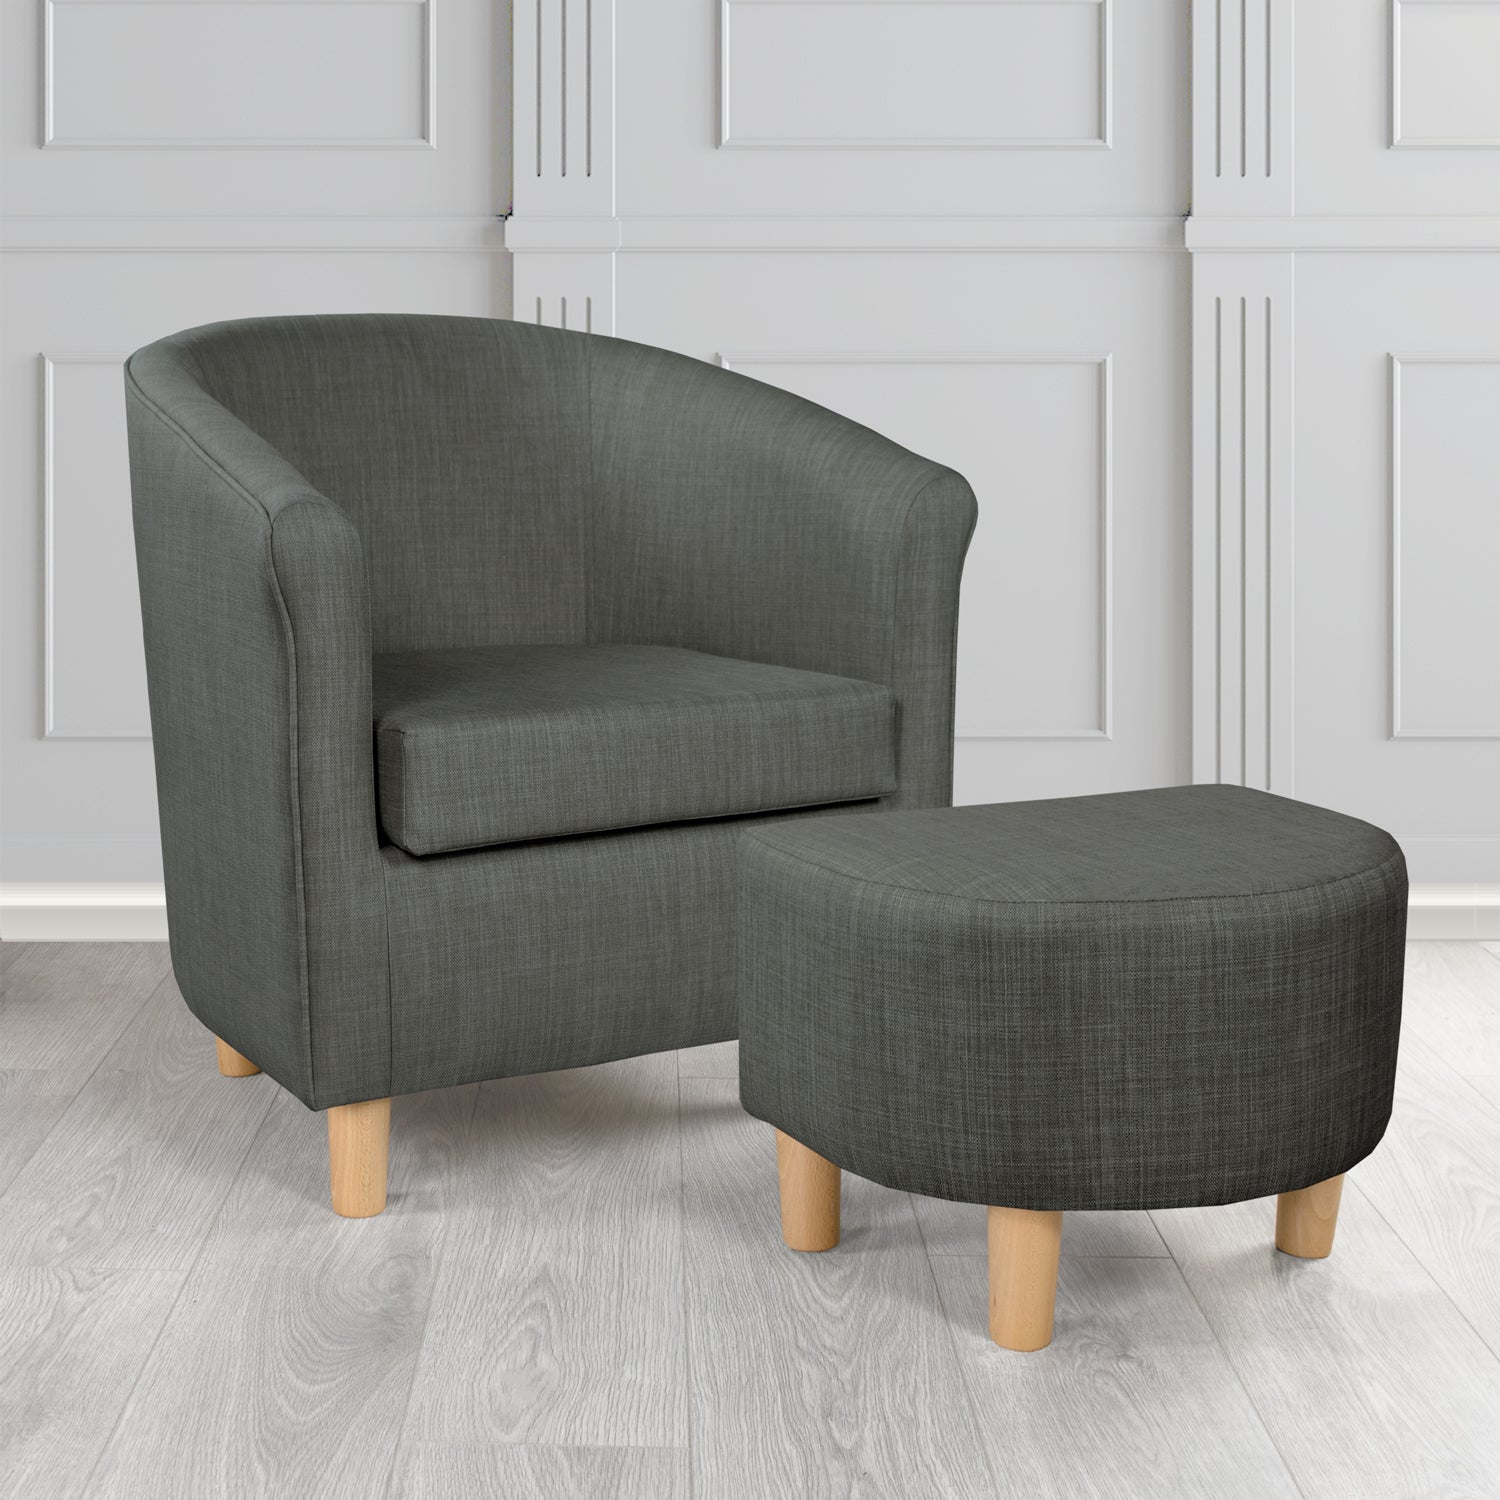 Tuscany Charles Charcoal Linen Plain Fabric Tub Chair with Dee Footstool Set - The Tub Chair Shop